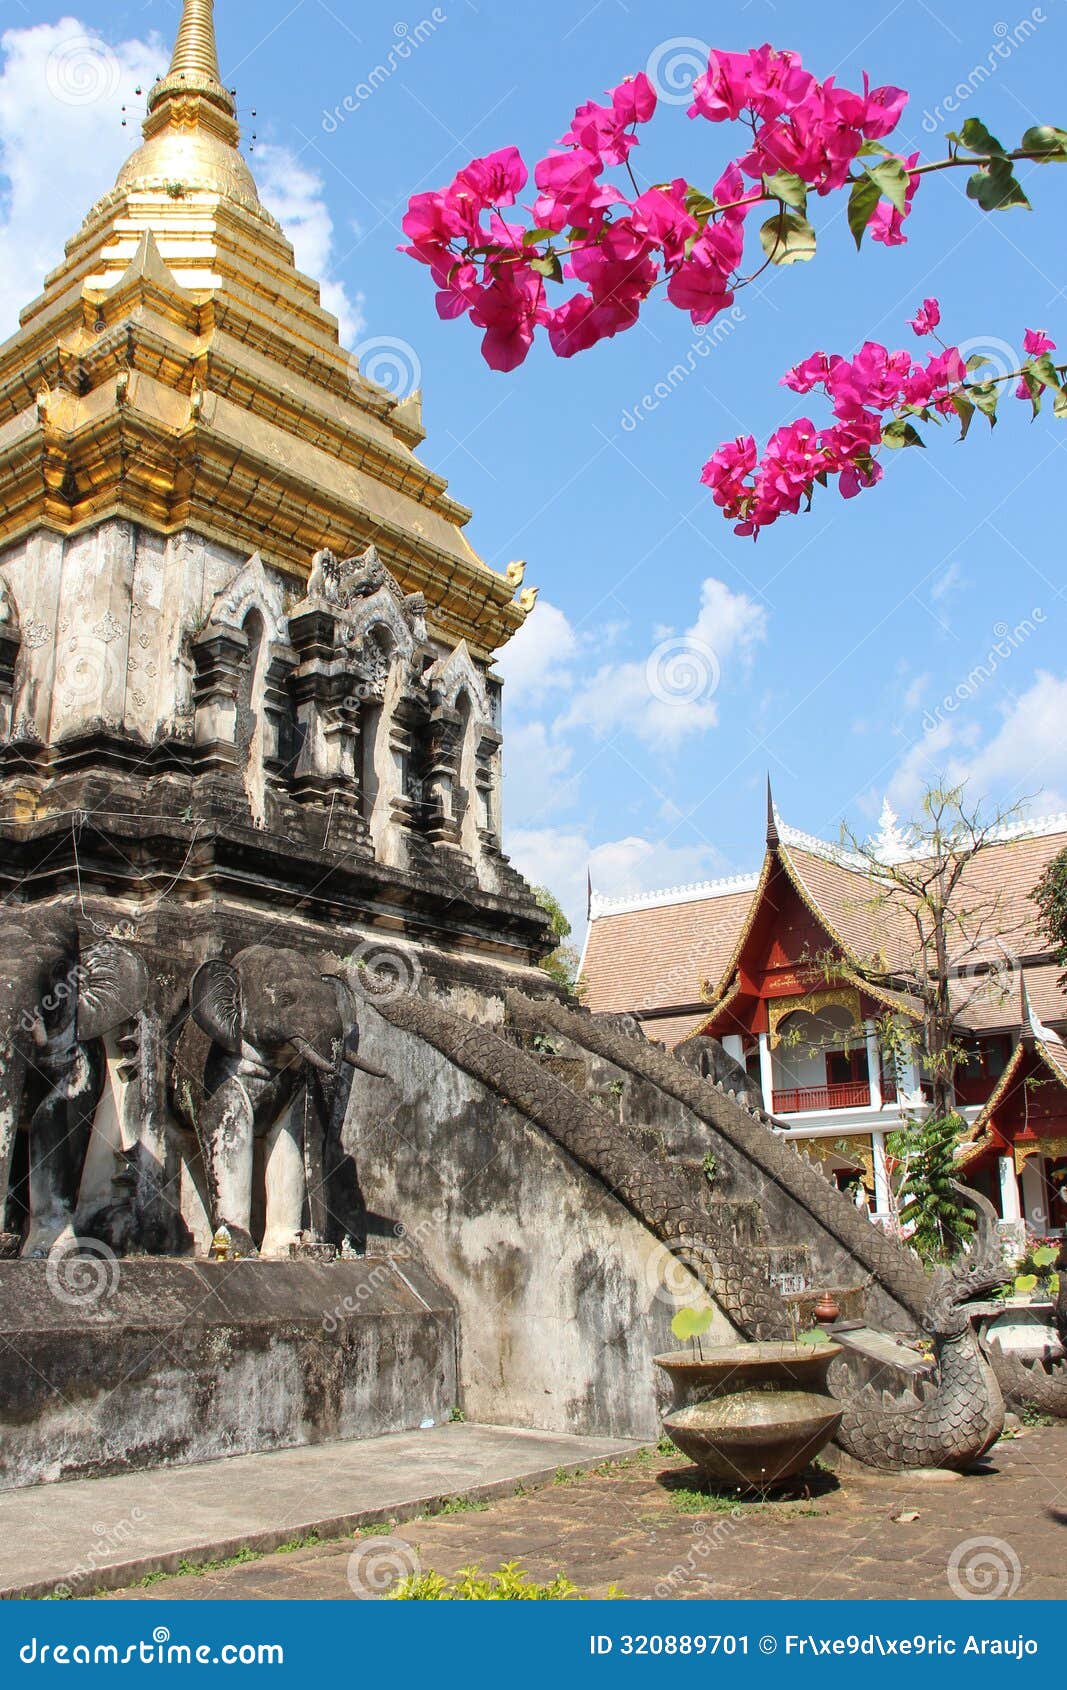 buddhist temple (wat chiang man) in chiang mai (thailand)